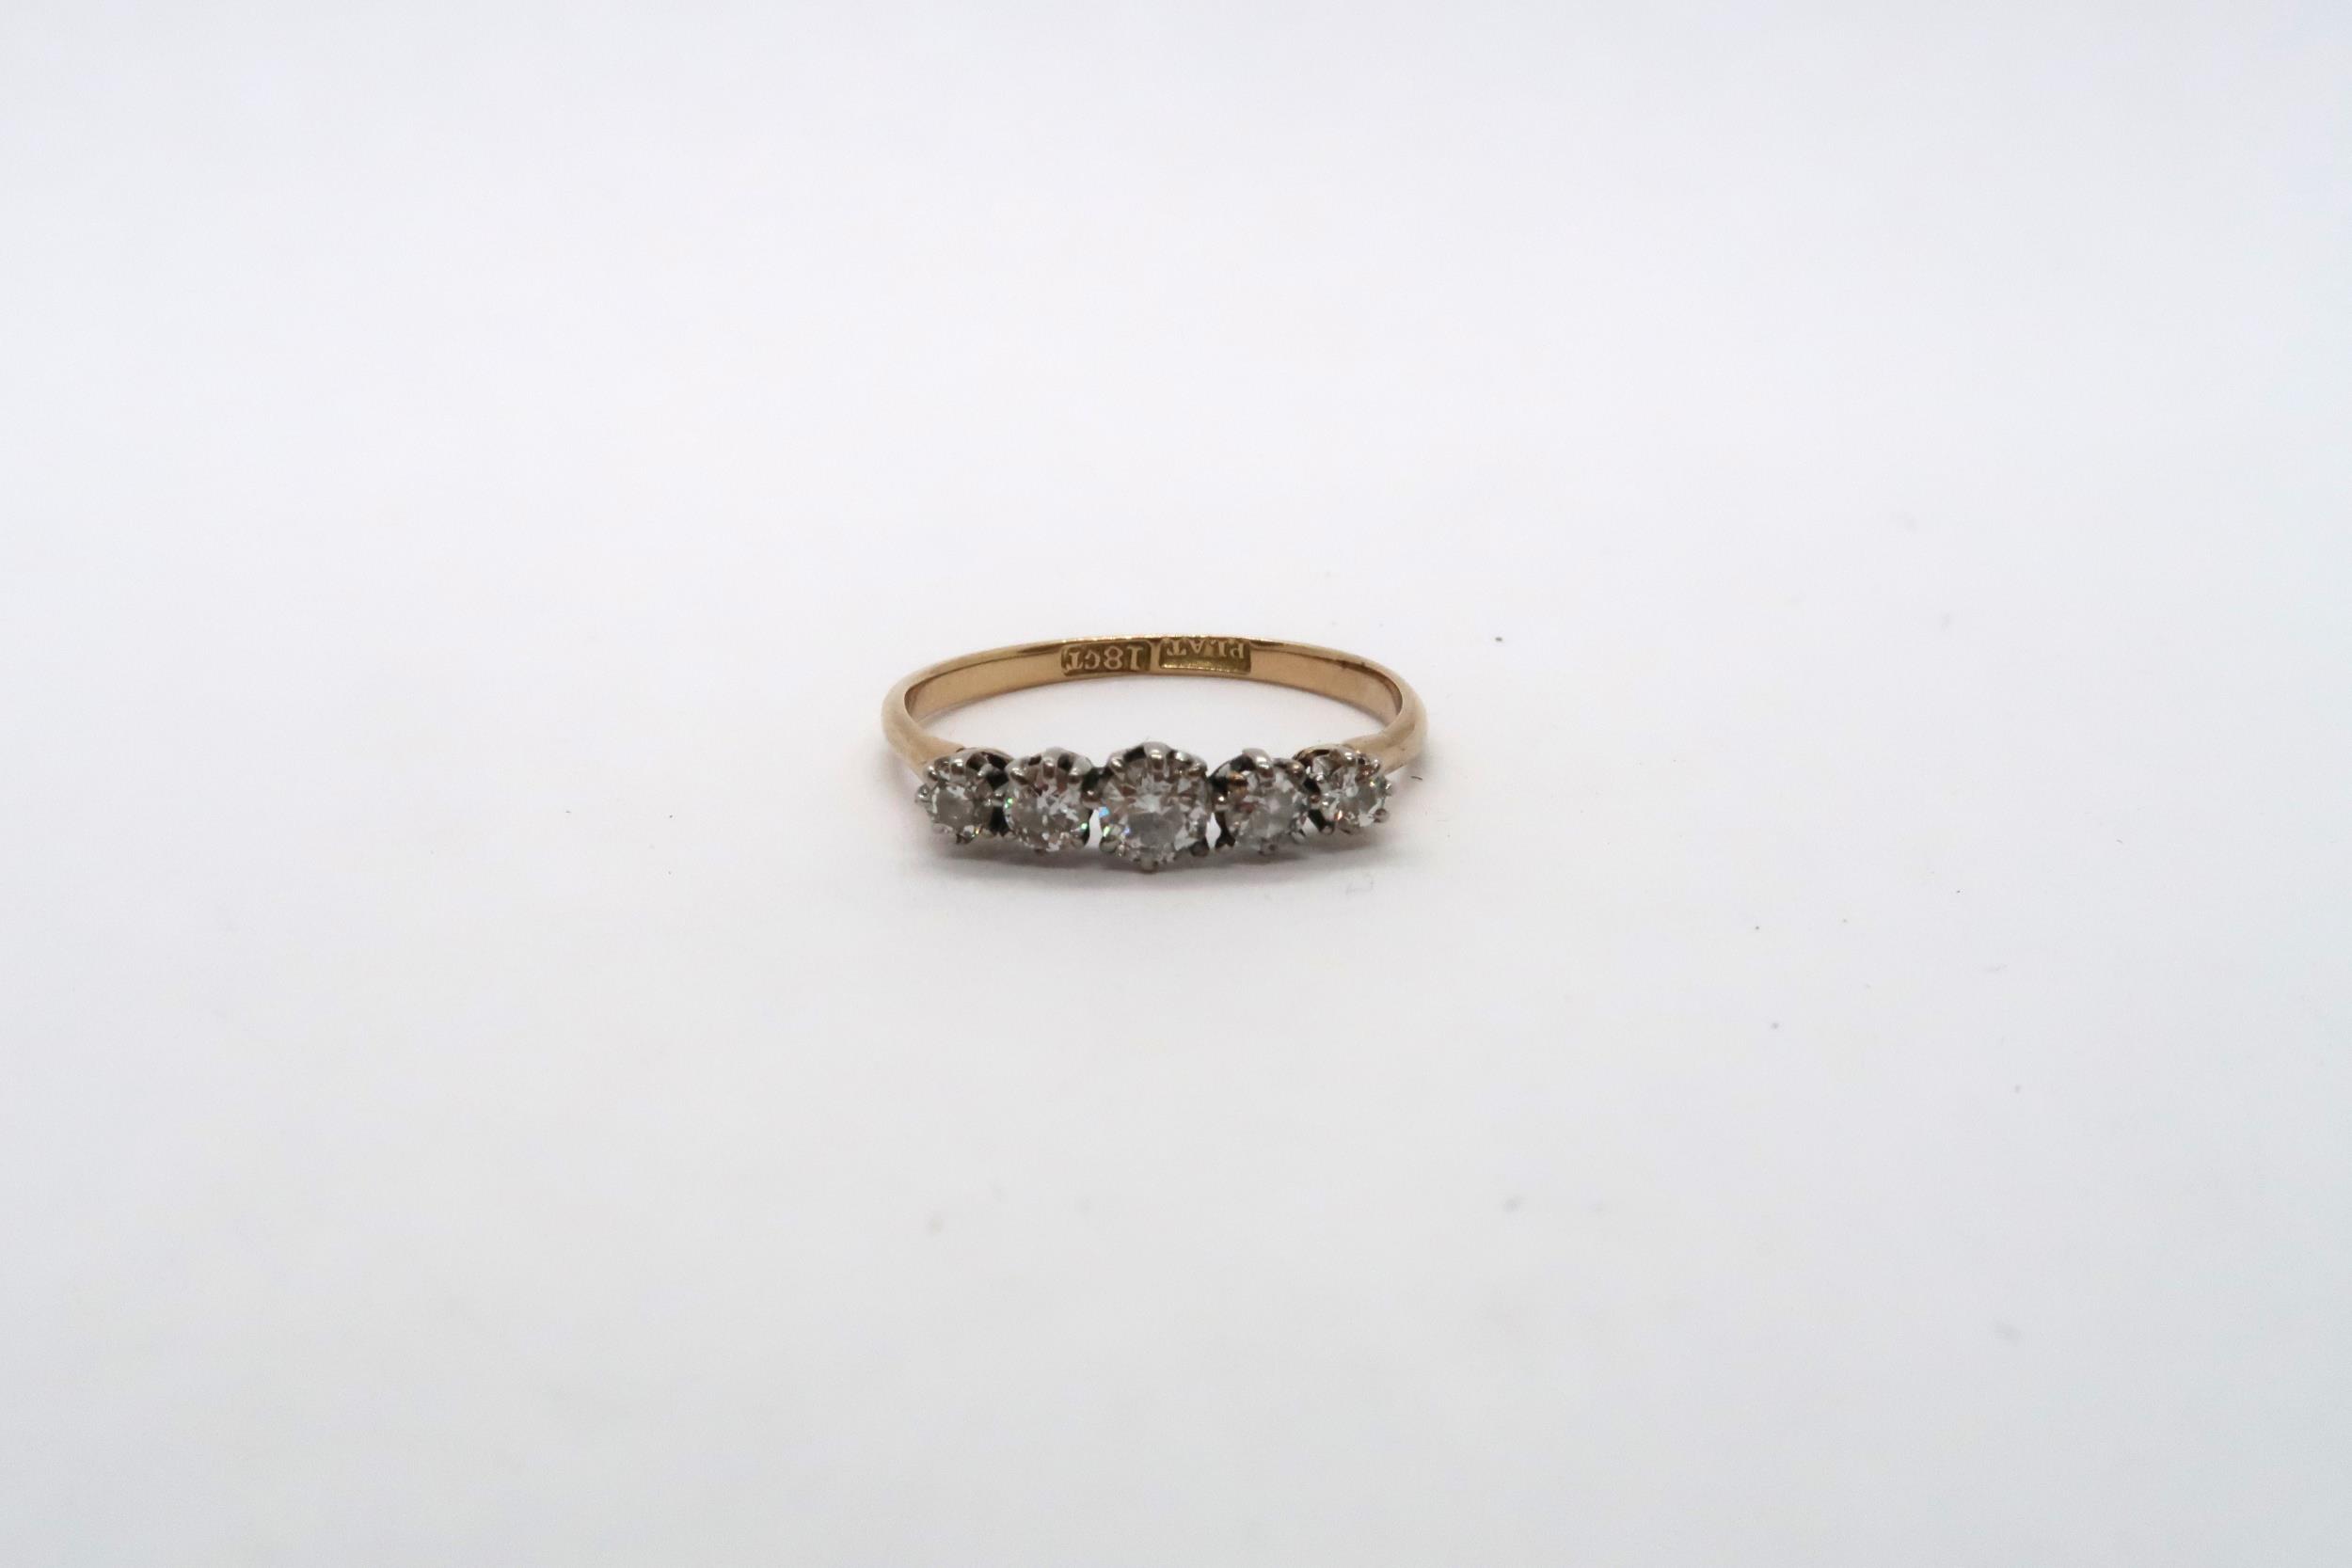 A five stone diamond ring - approx weight 1.89 grams - ring size P/Q